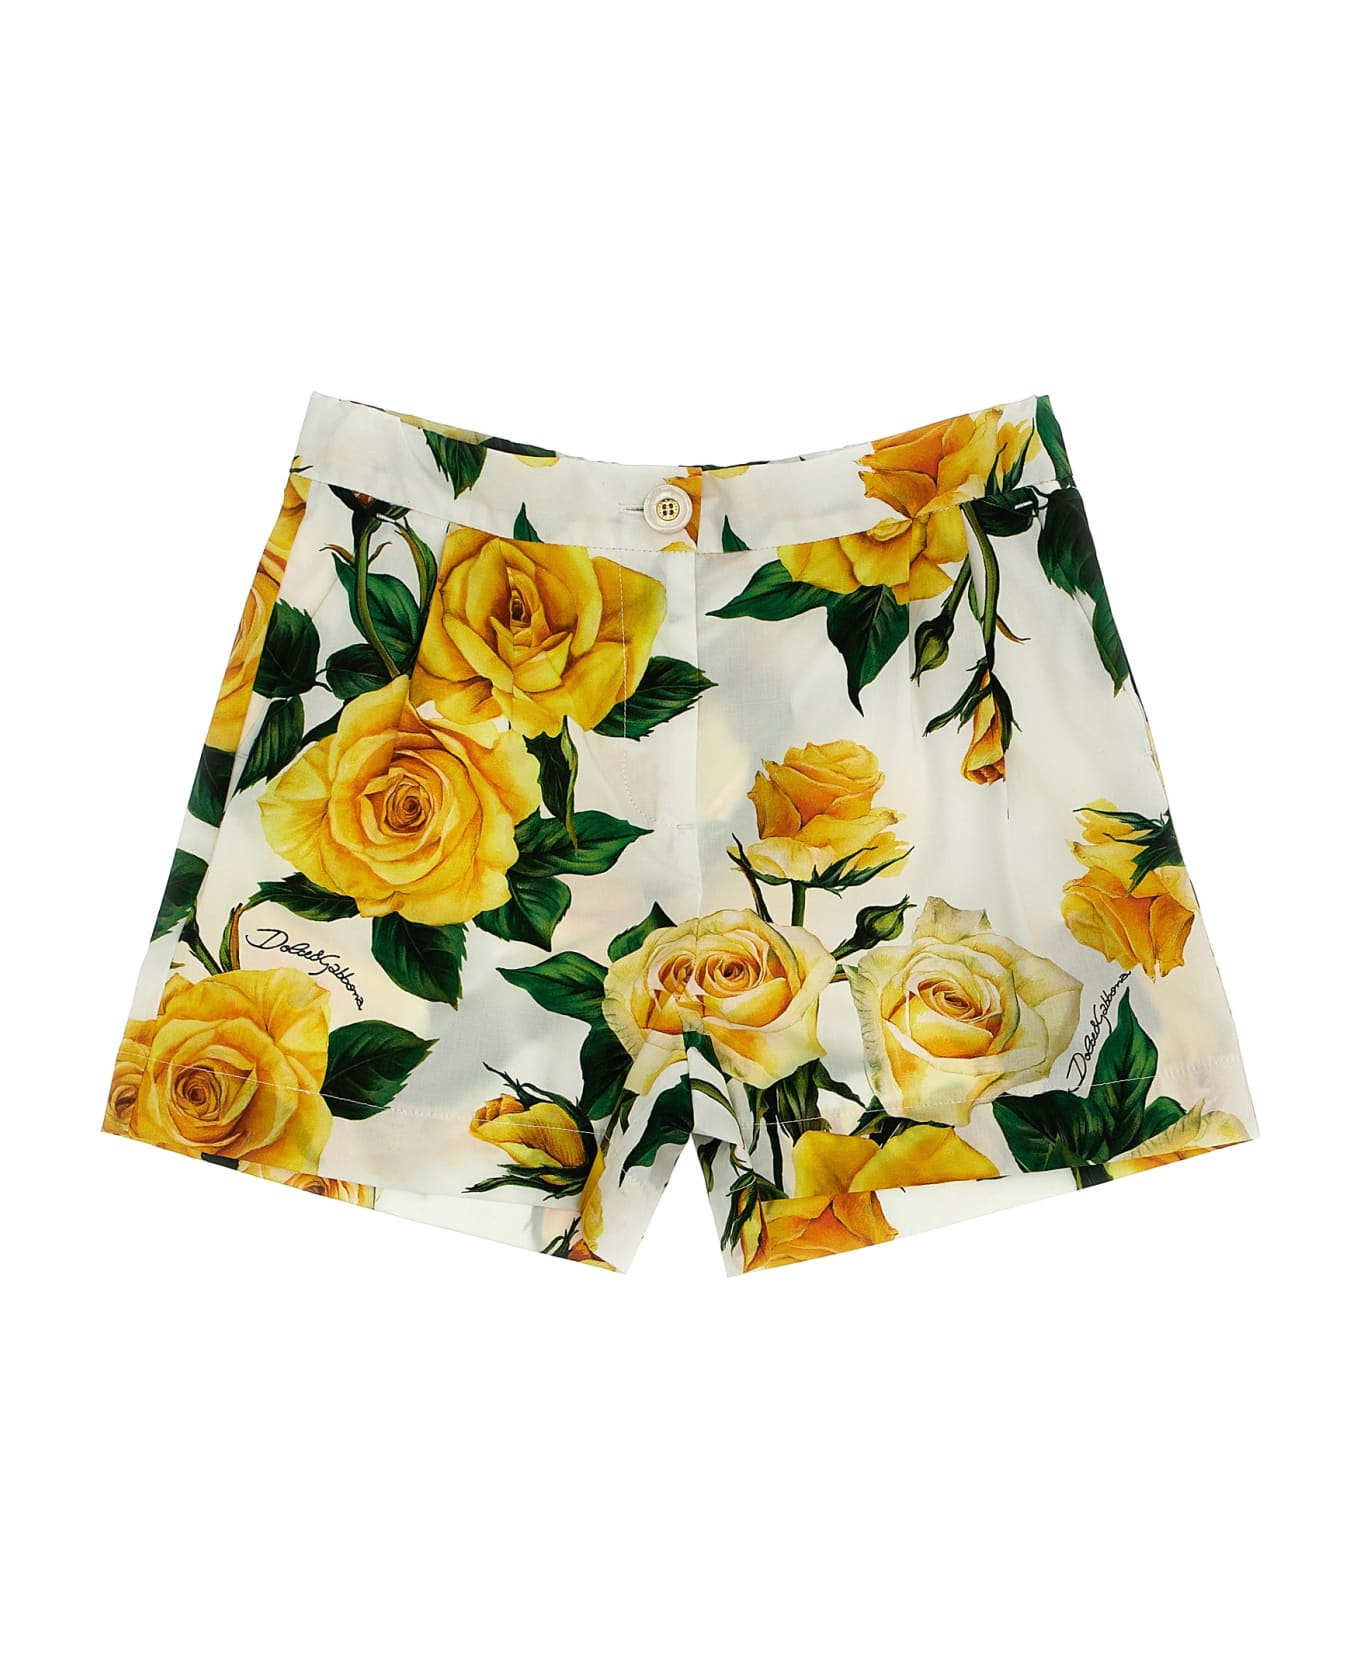 Dolce & Gabbana 'rose Gialle' Shorts - Multicolore